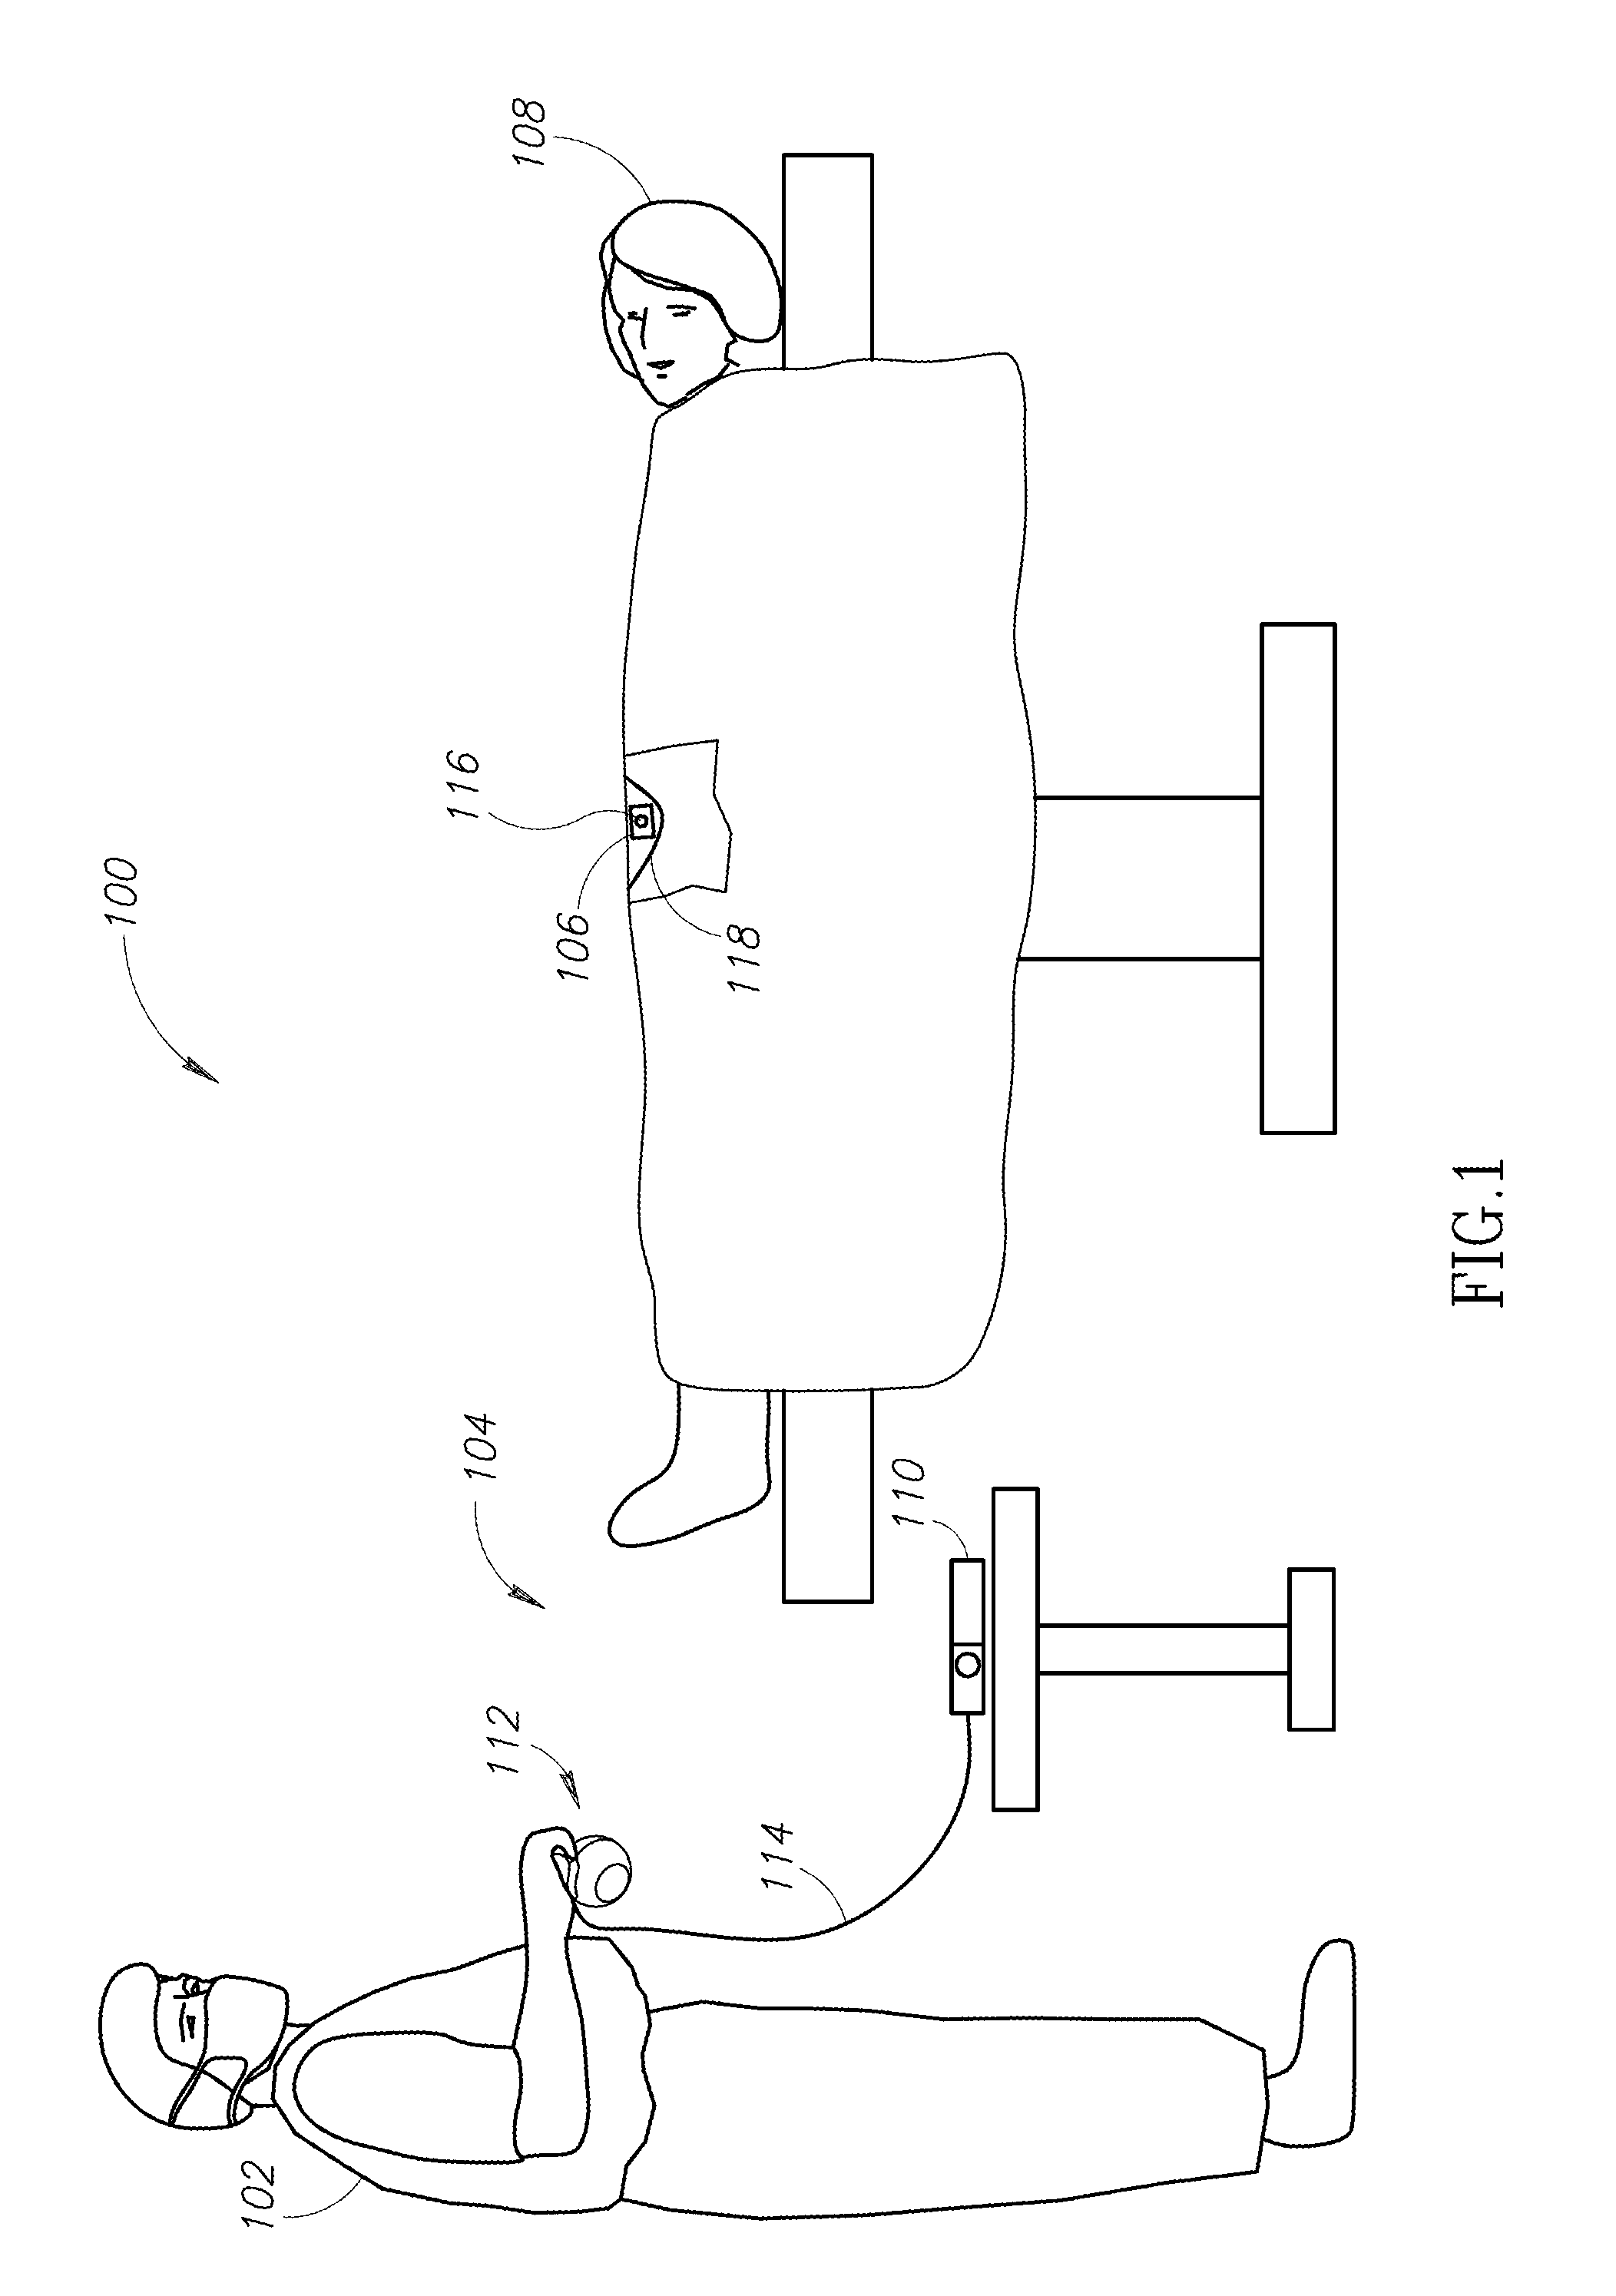 Method, apparatus and article for detection of transponder tagged objects, for example during surgery